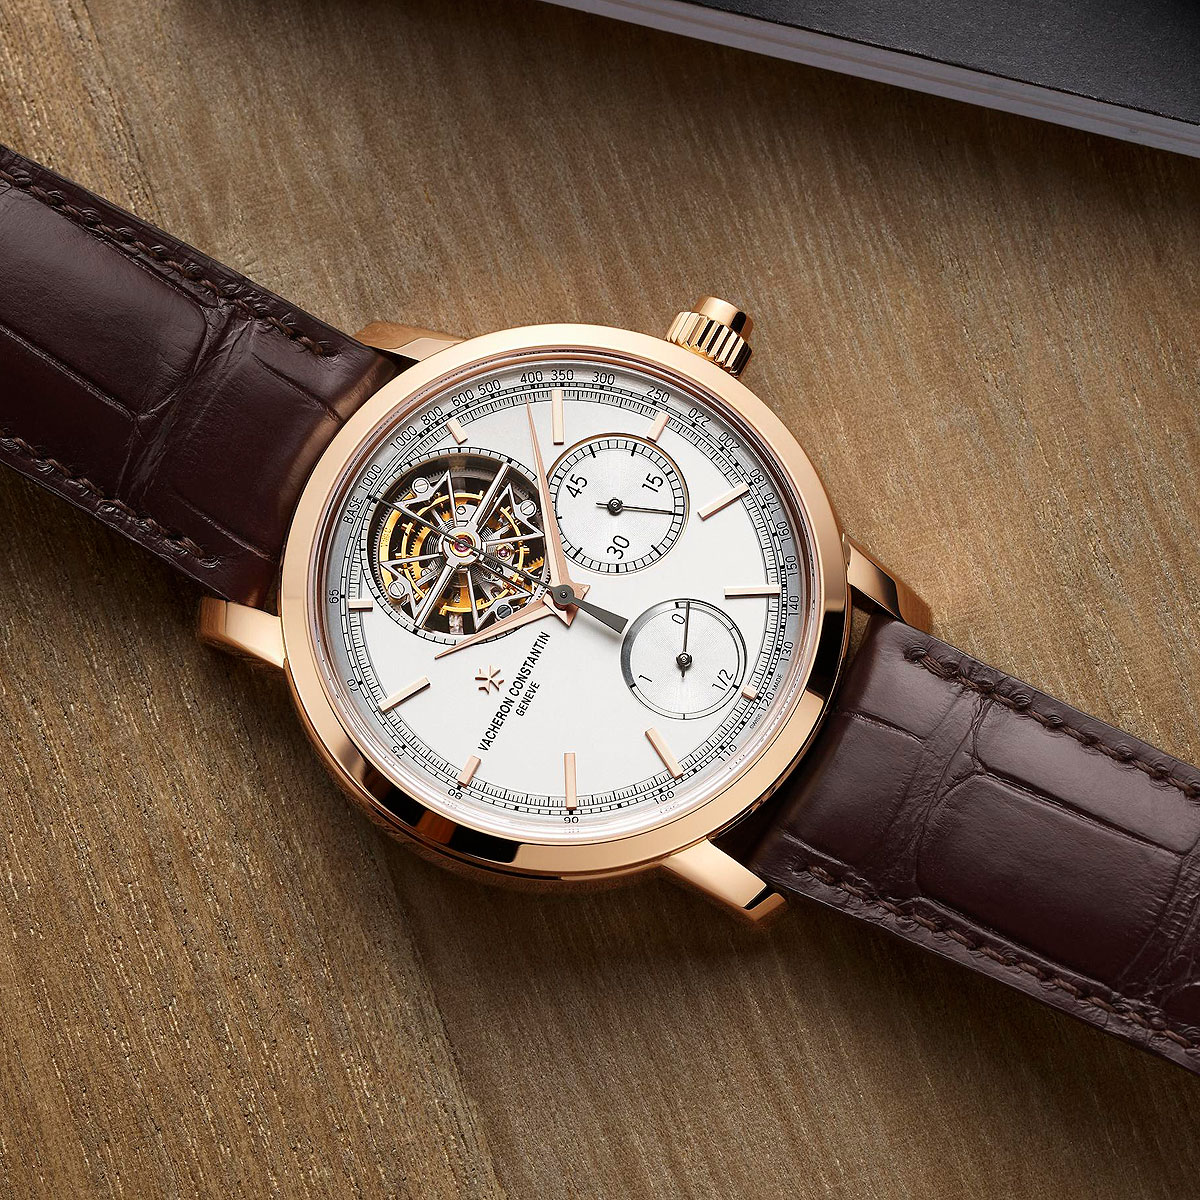 Showing at WatchTime Live 2020: Vacheron Constantin Traditionnelle ...